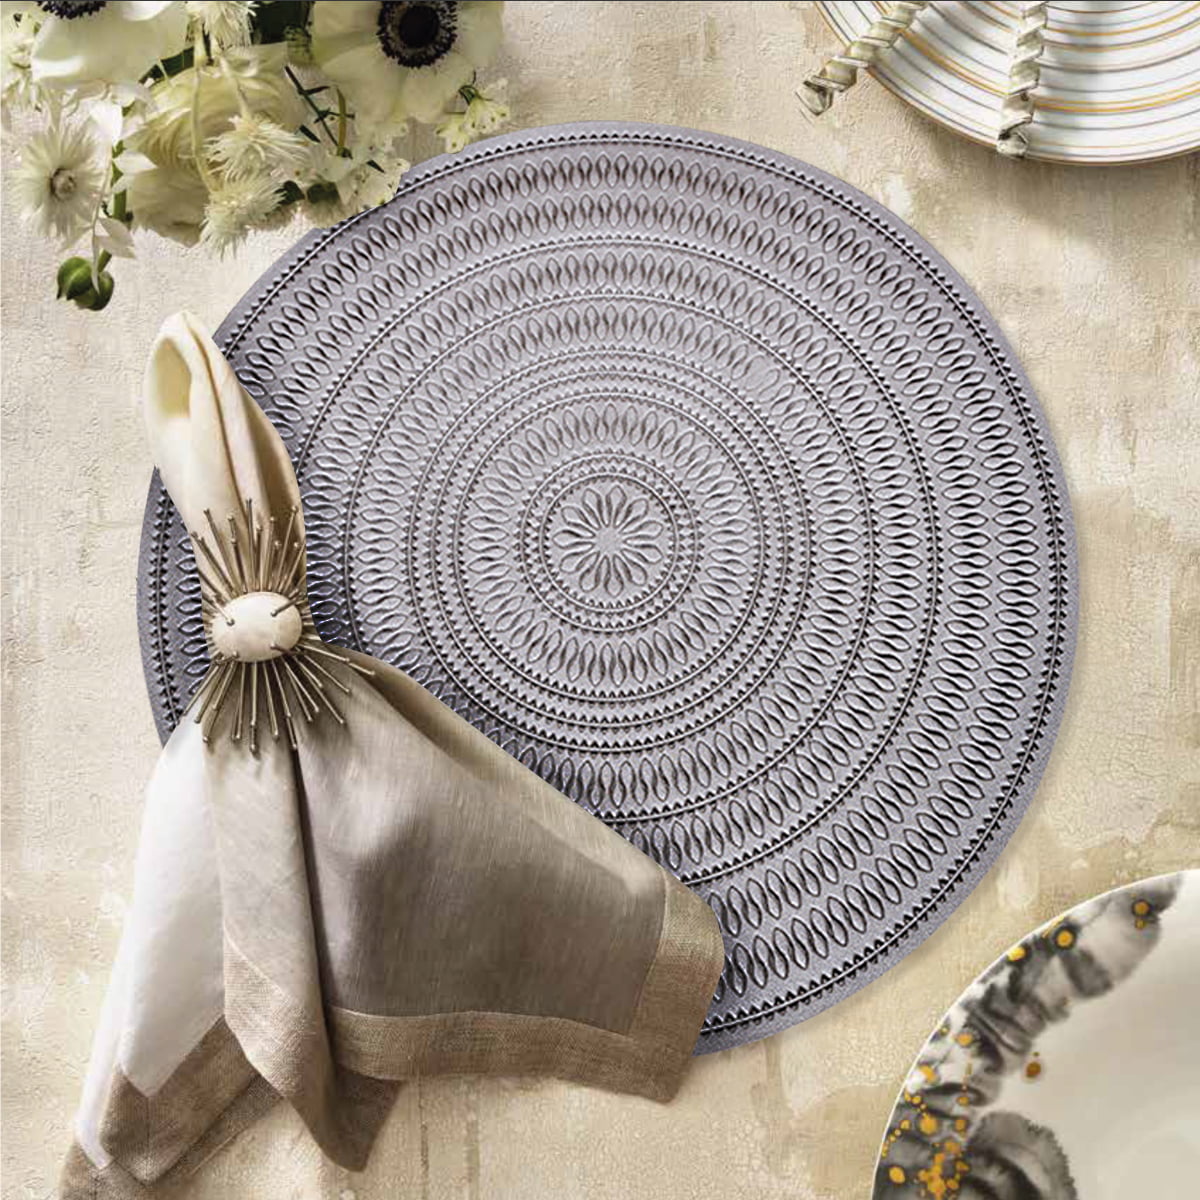 Country Rustic Decor Disposable More The Merrier Pak 24 Kitchen Table Placemats indigo Farmhouse Kitchen Decor Paper Placemats for Dining Table Mats